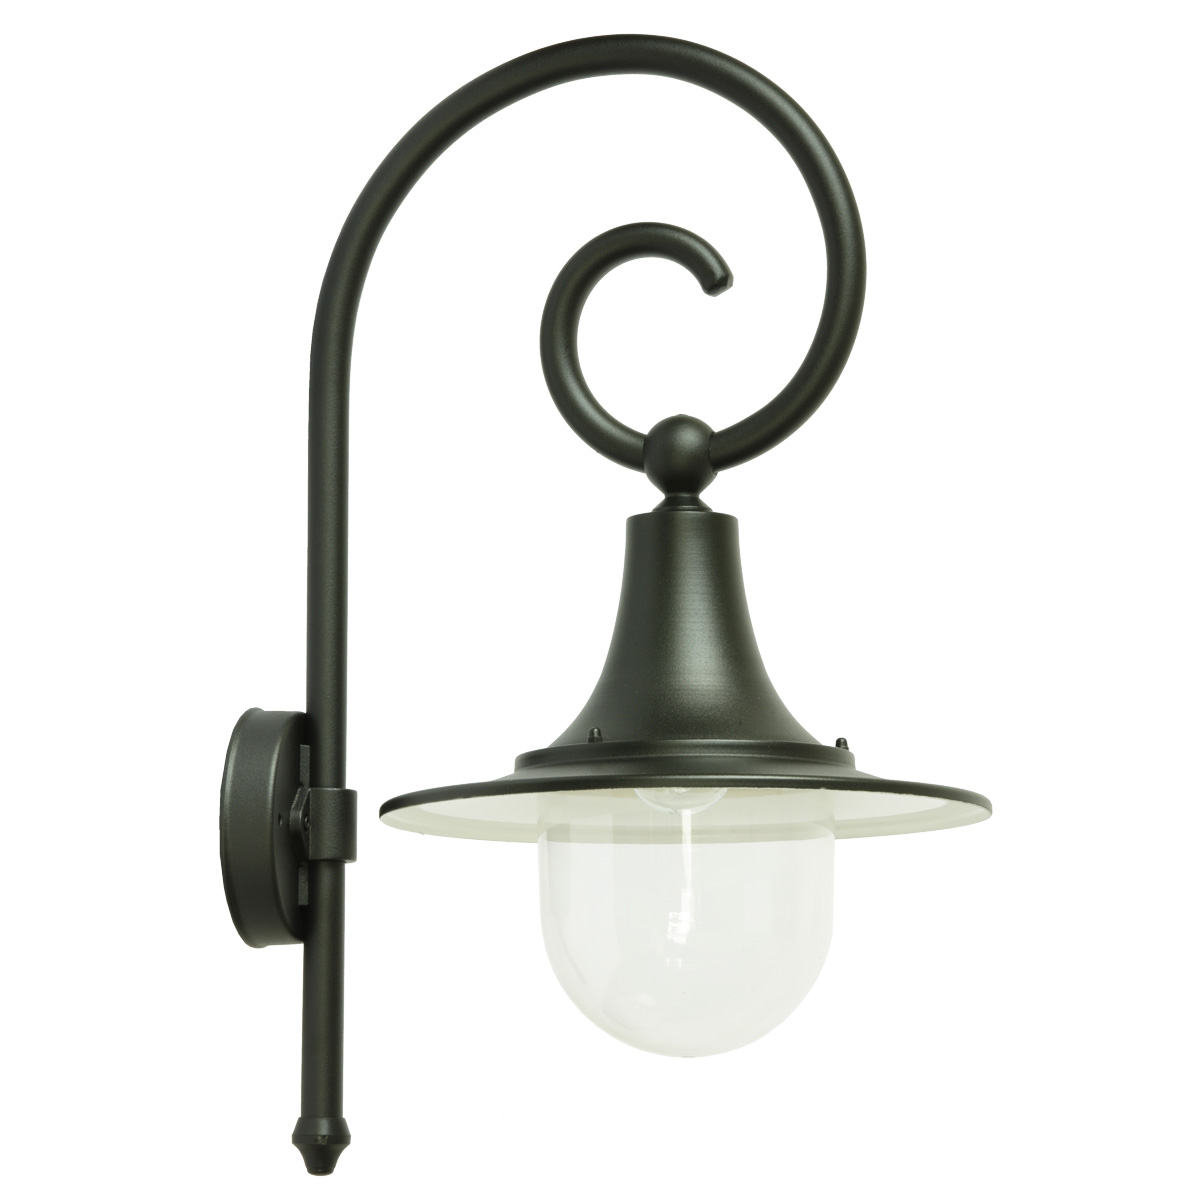 Industrial-style Wall Light with Crosier for Outdoor Use